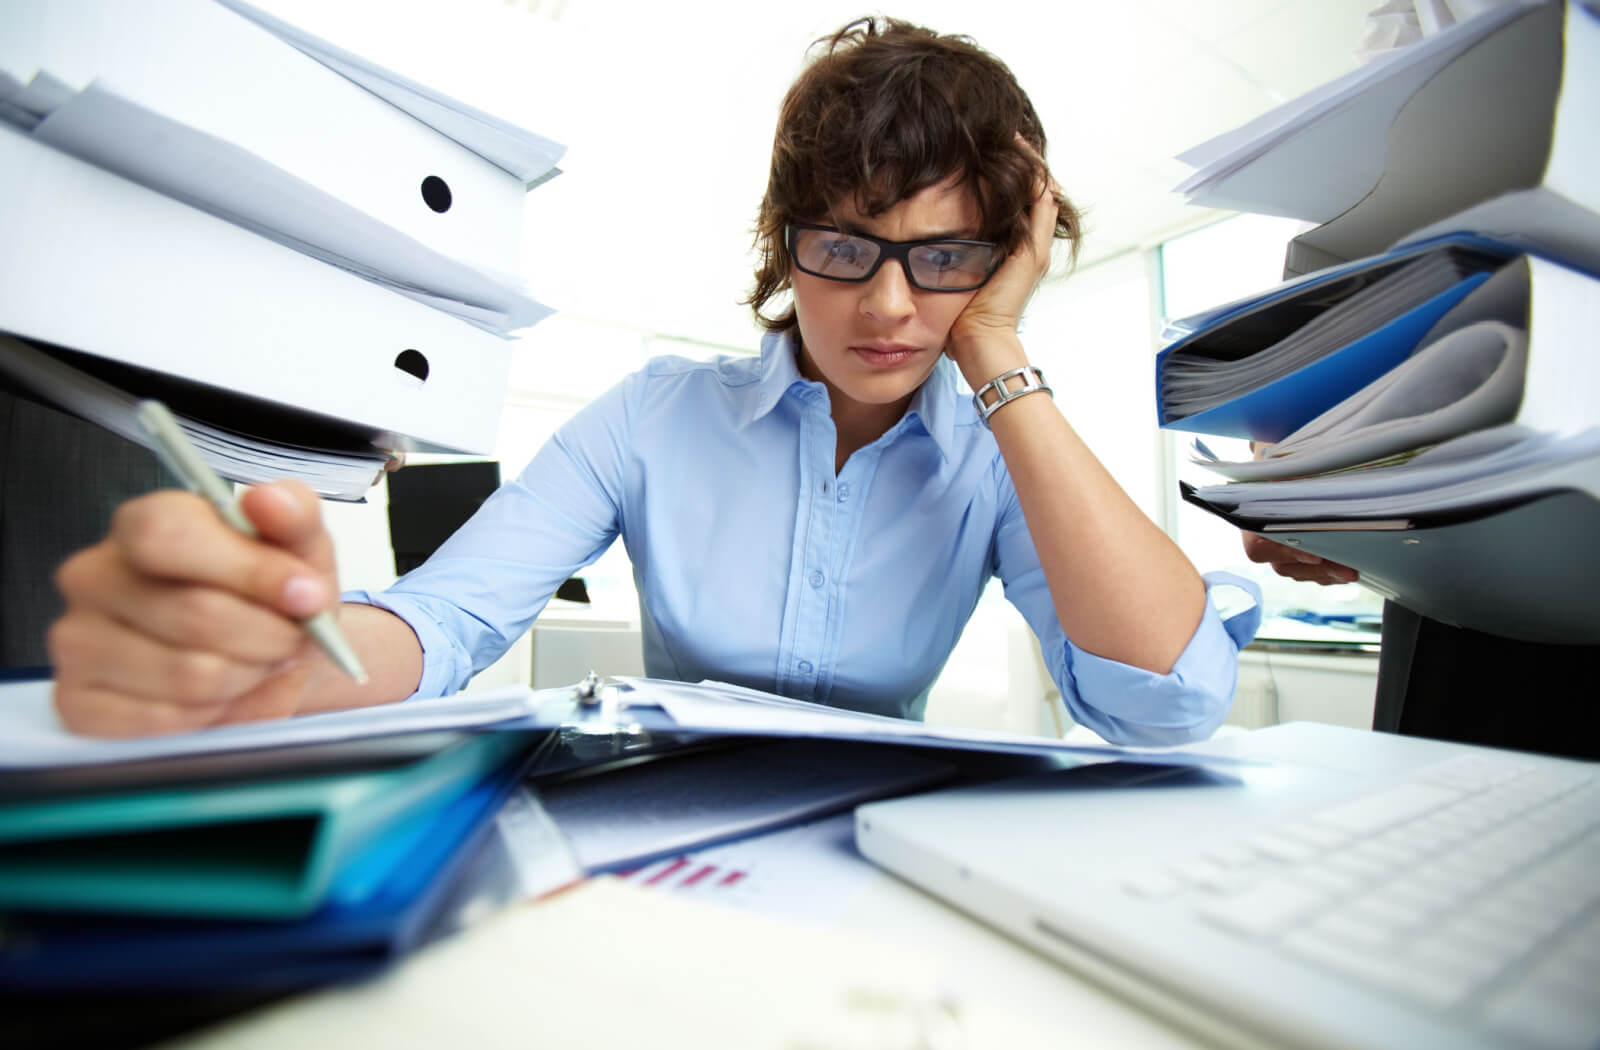 A professional-looking woman stressed by the amount of paperwork on her desk.